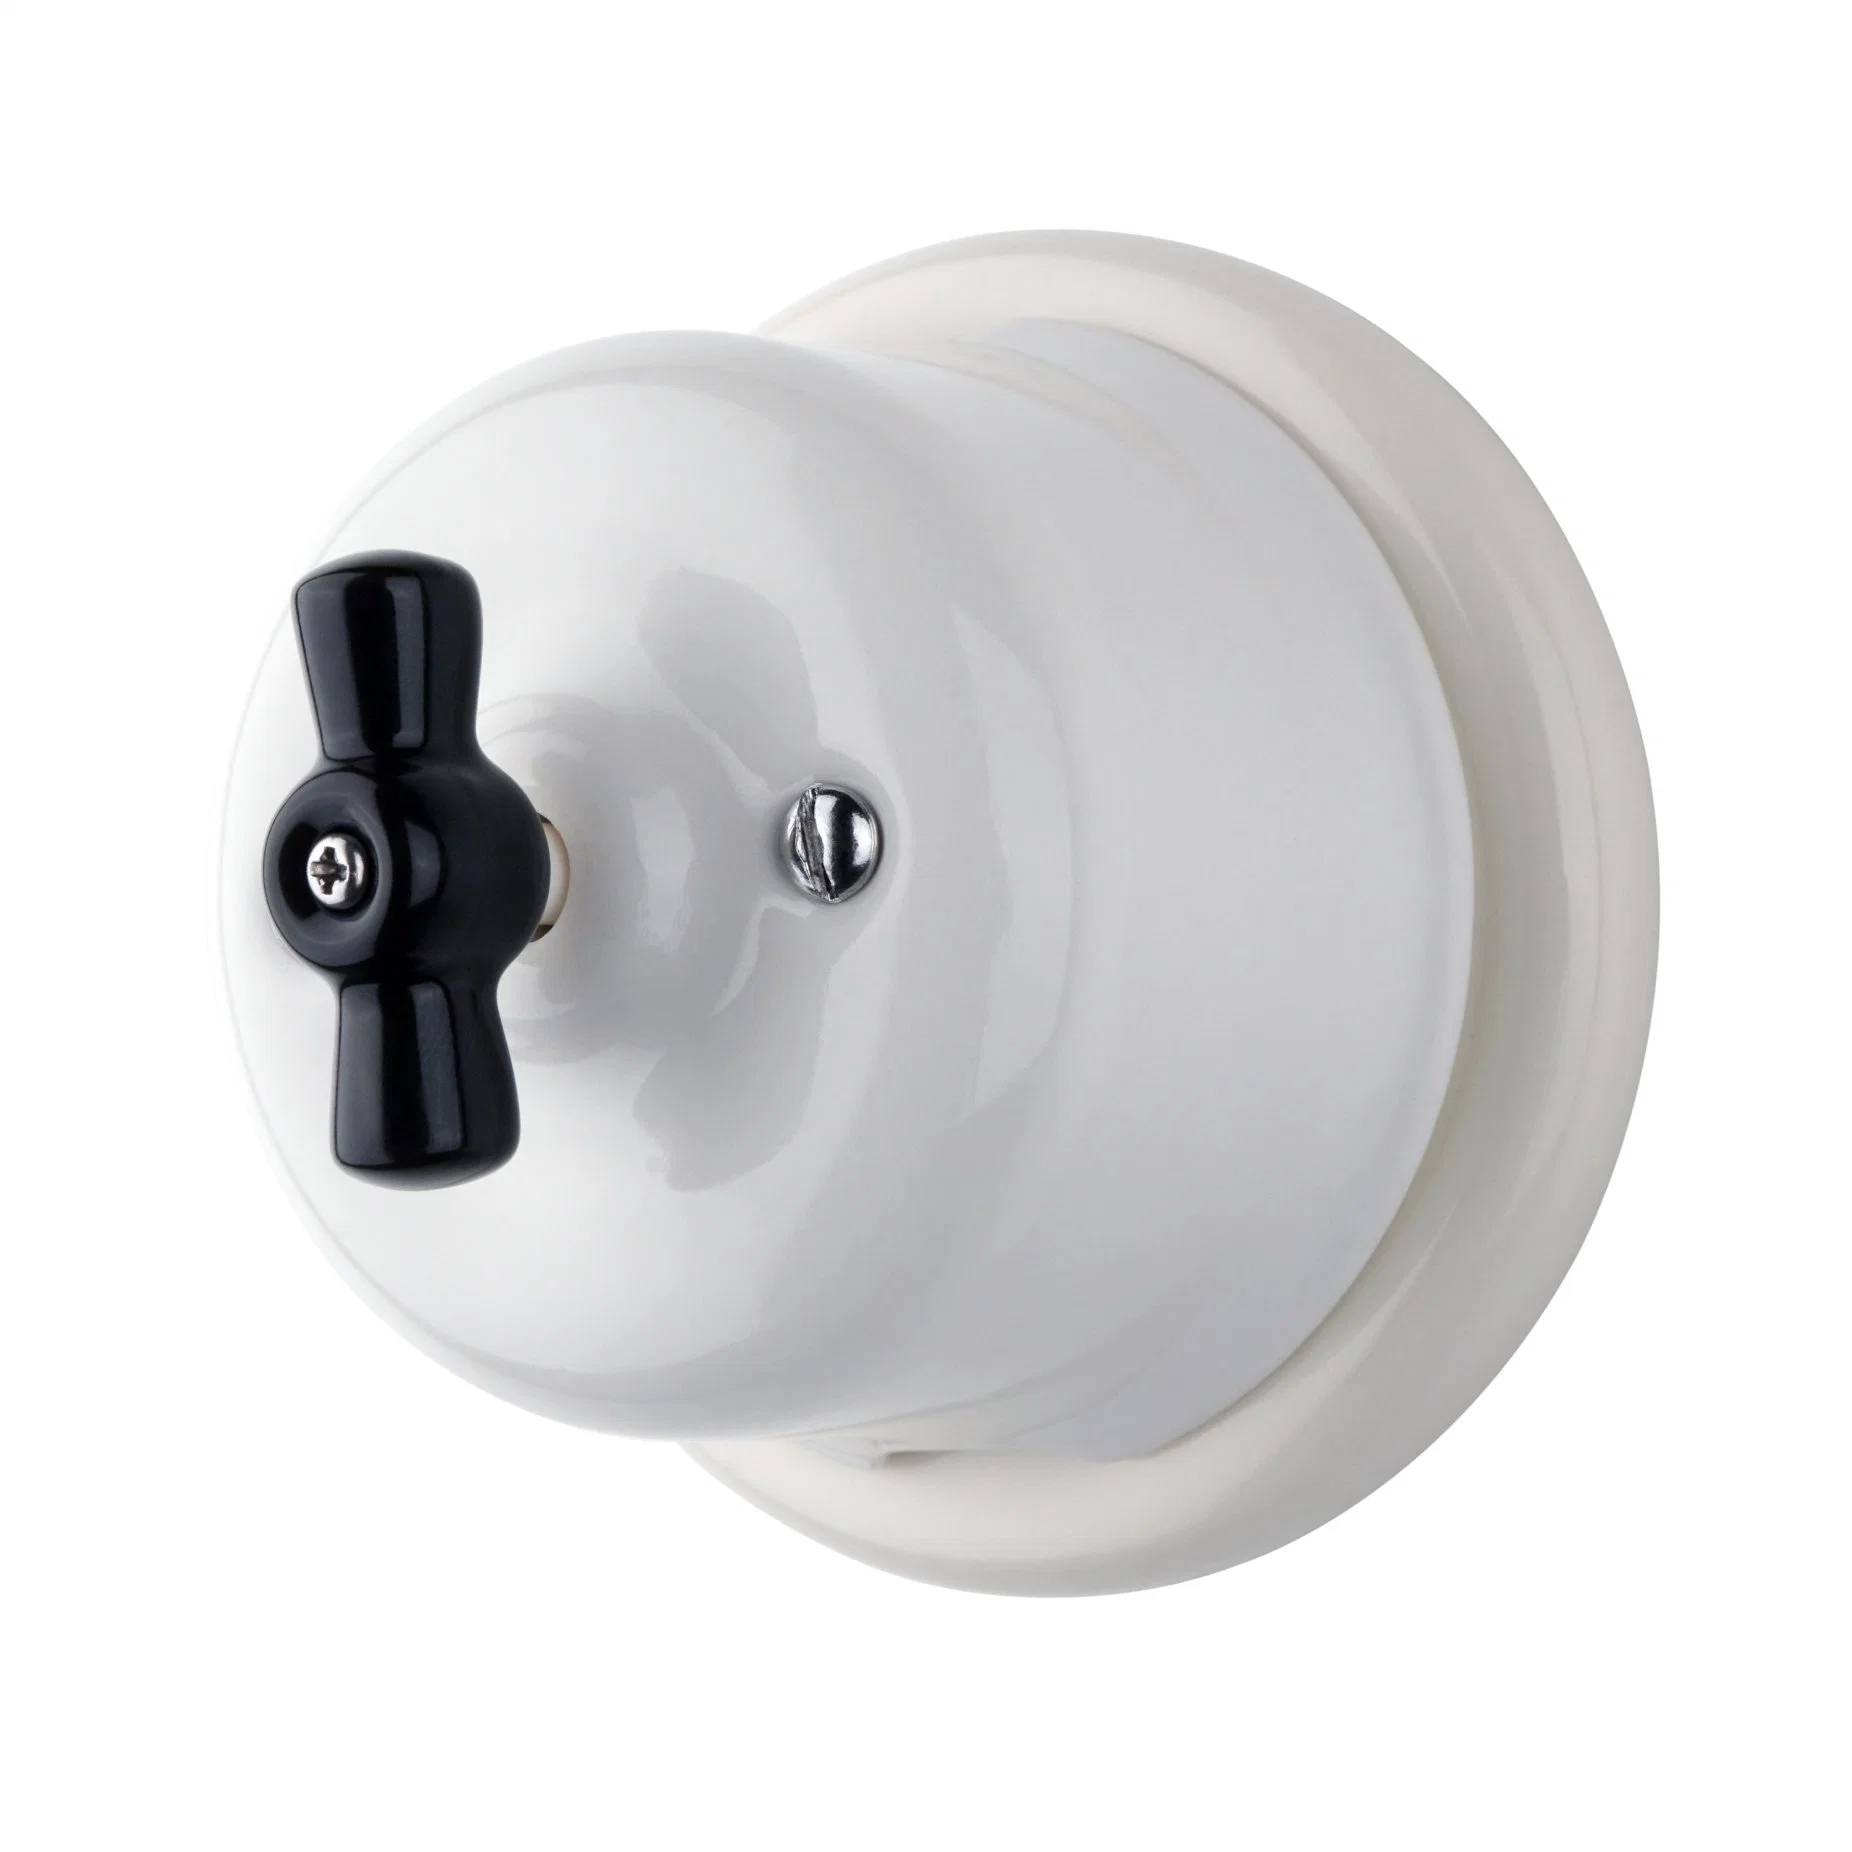 Hot-Sale Ceramic Retro Wall Switch EU Standard White Rotary Electrical Light Switch for Bell